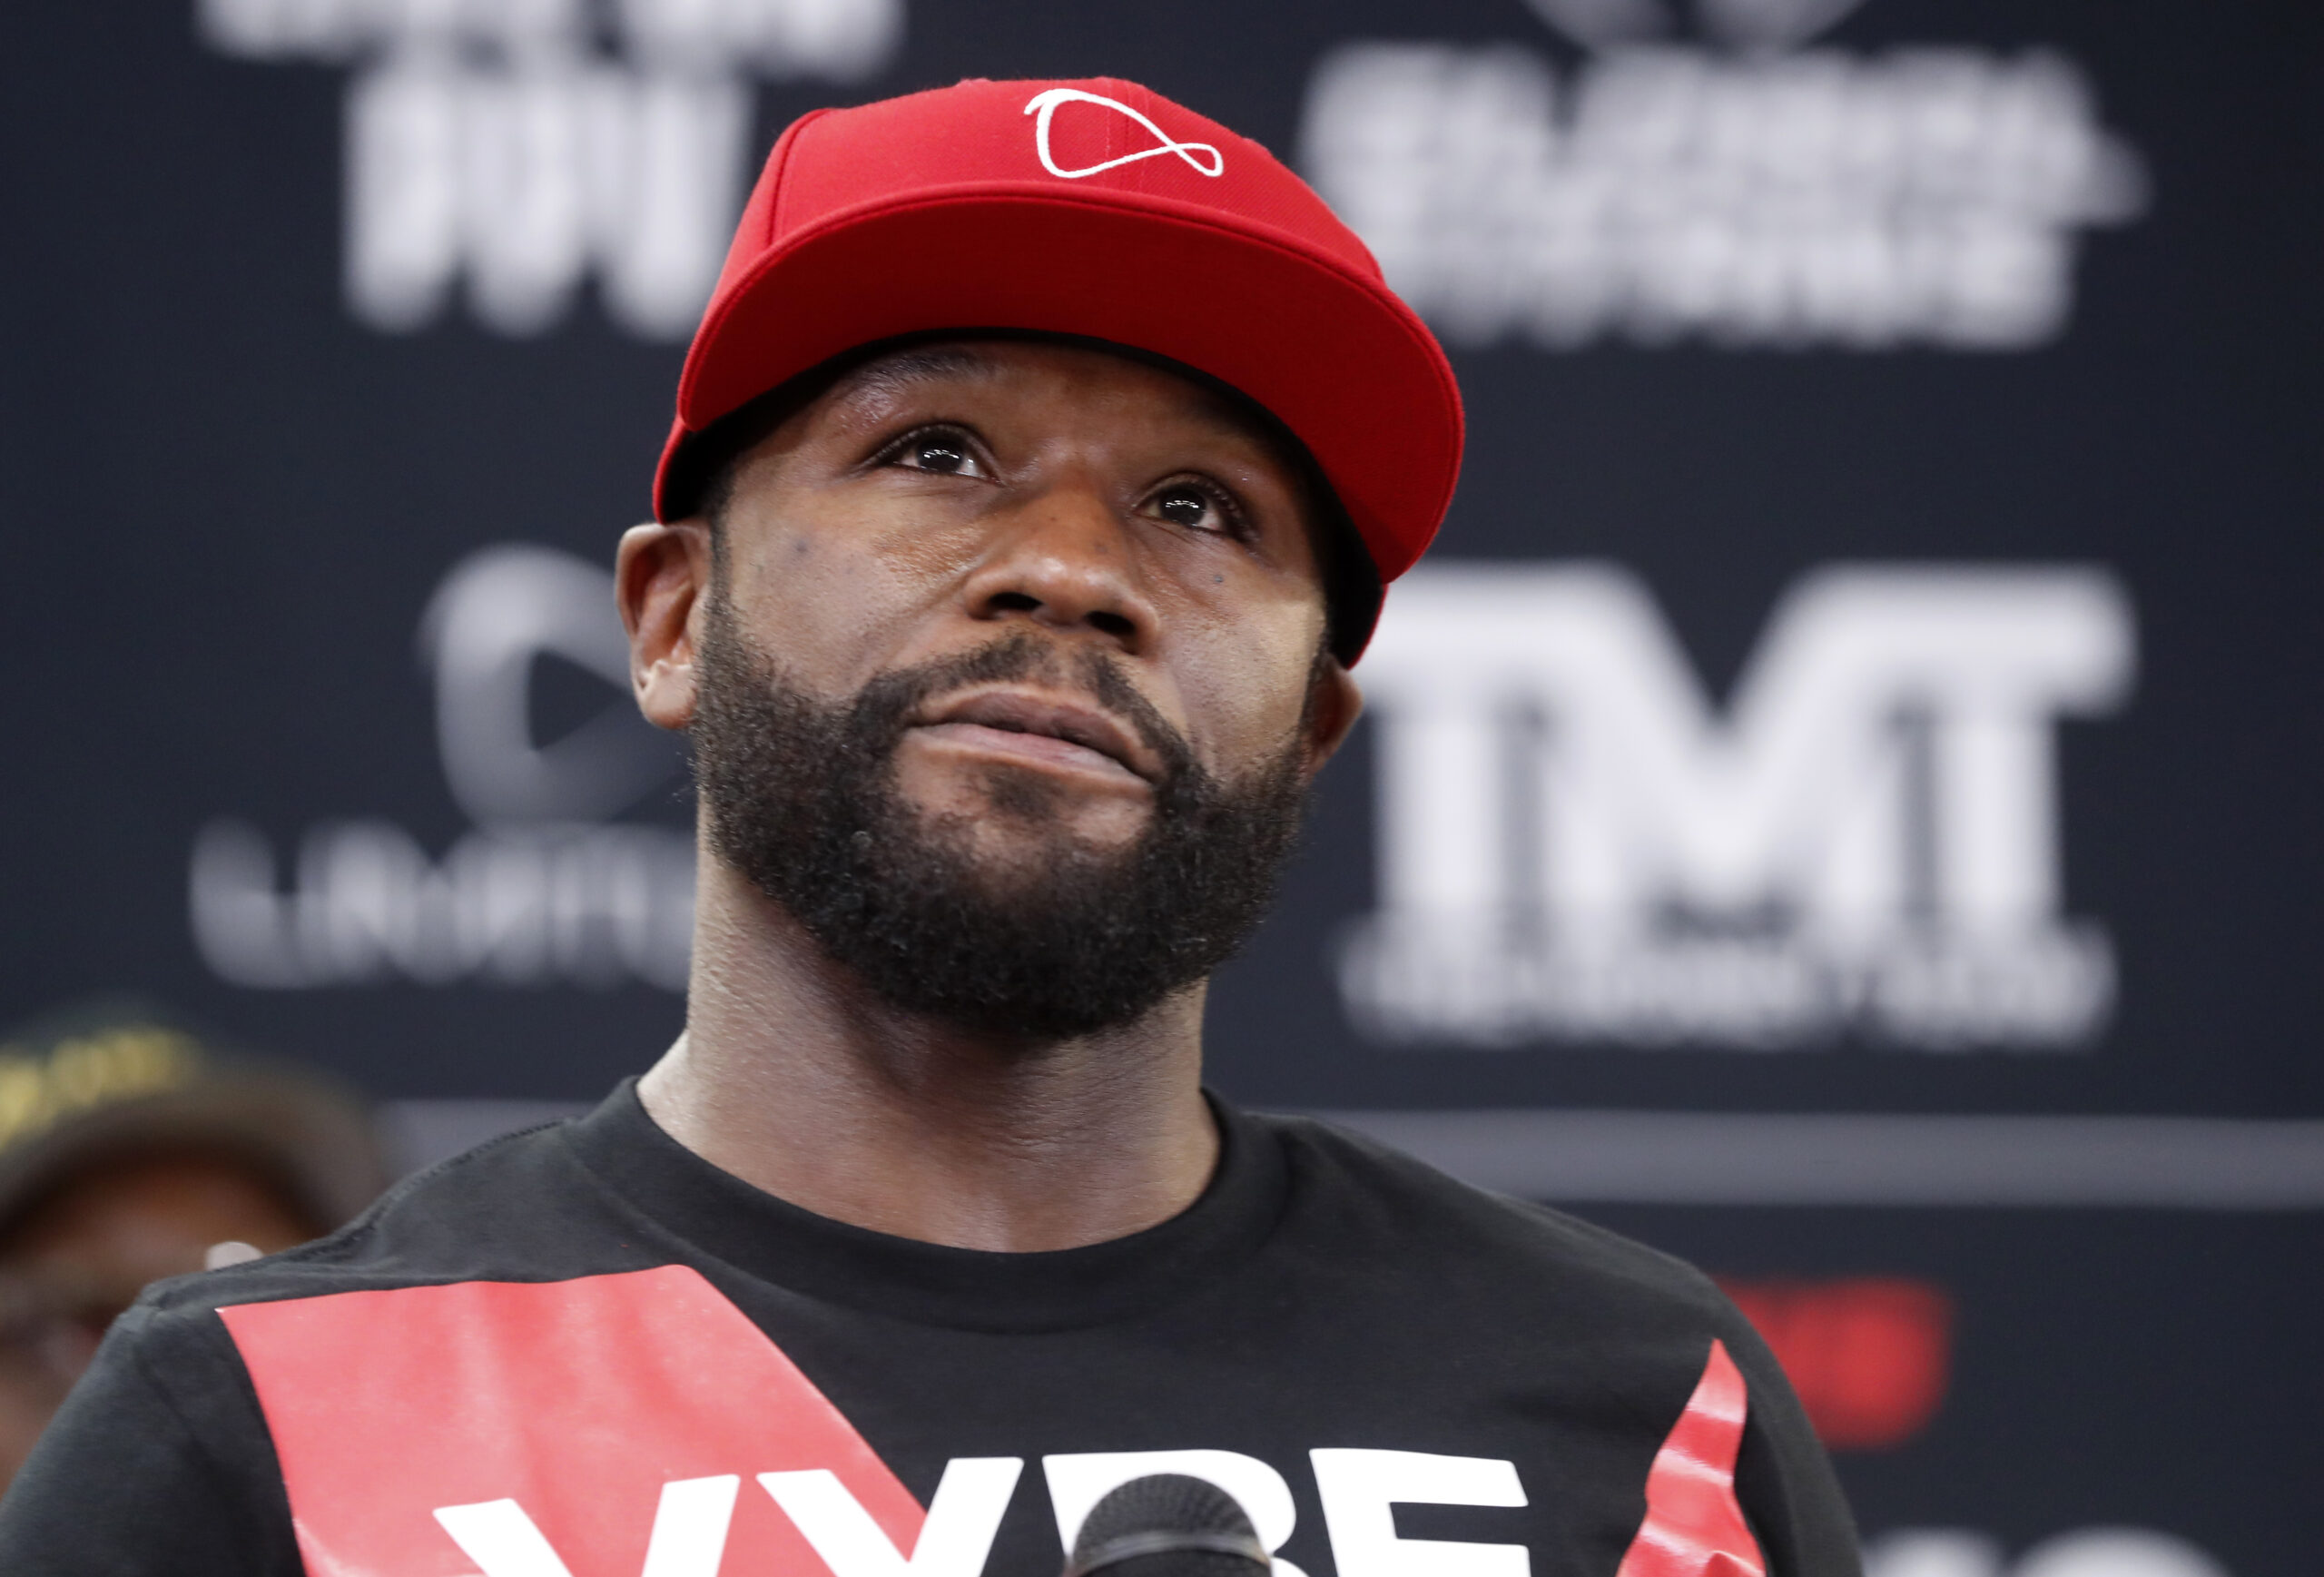 Floyd Mayweather wants to sign Francis Ngannou: ‘He can make some noise’ in boxing